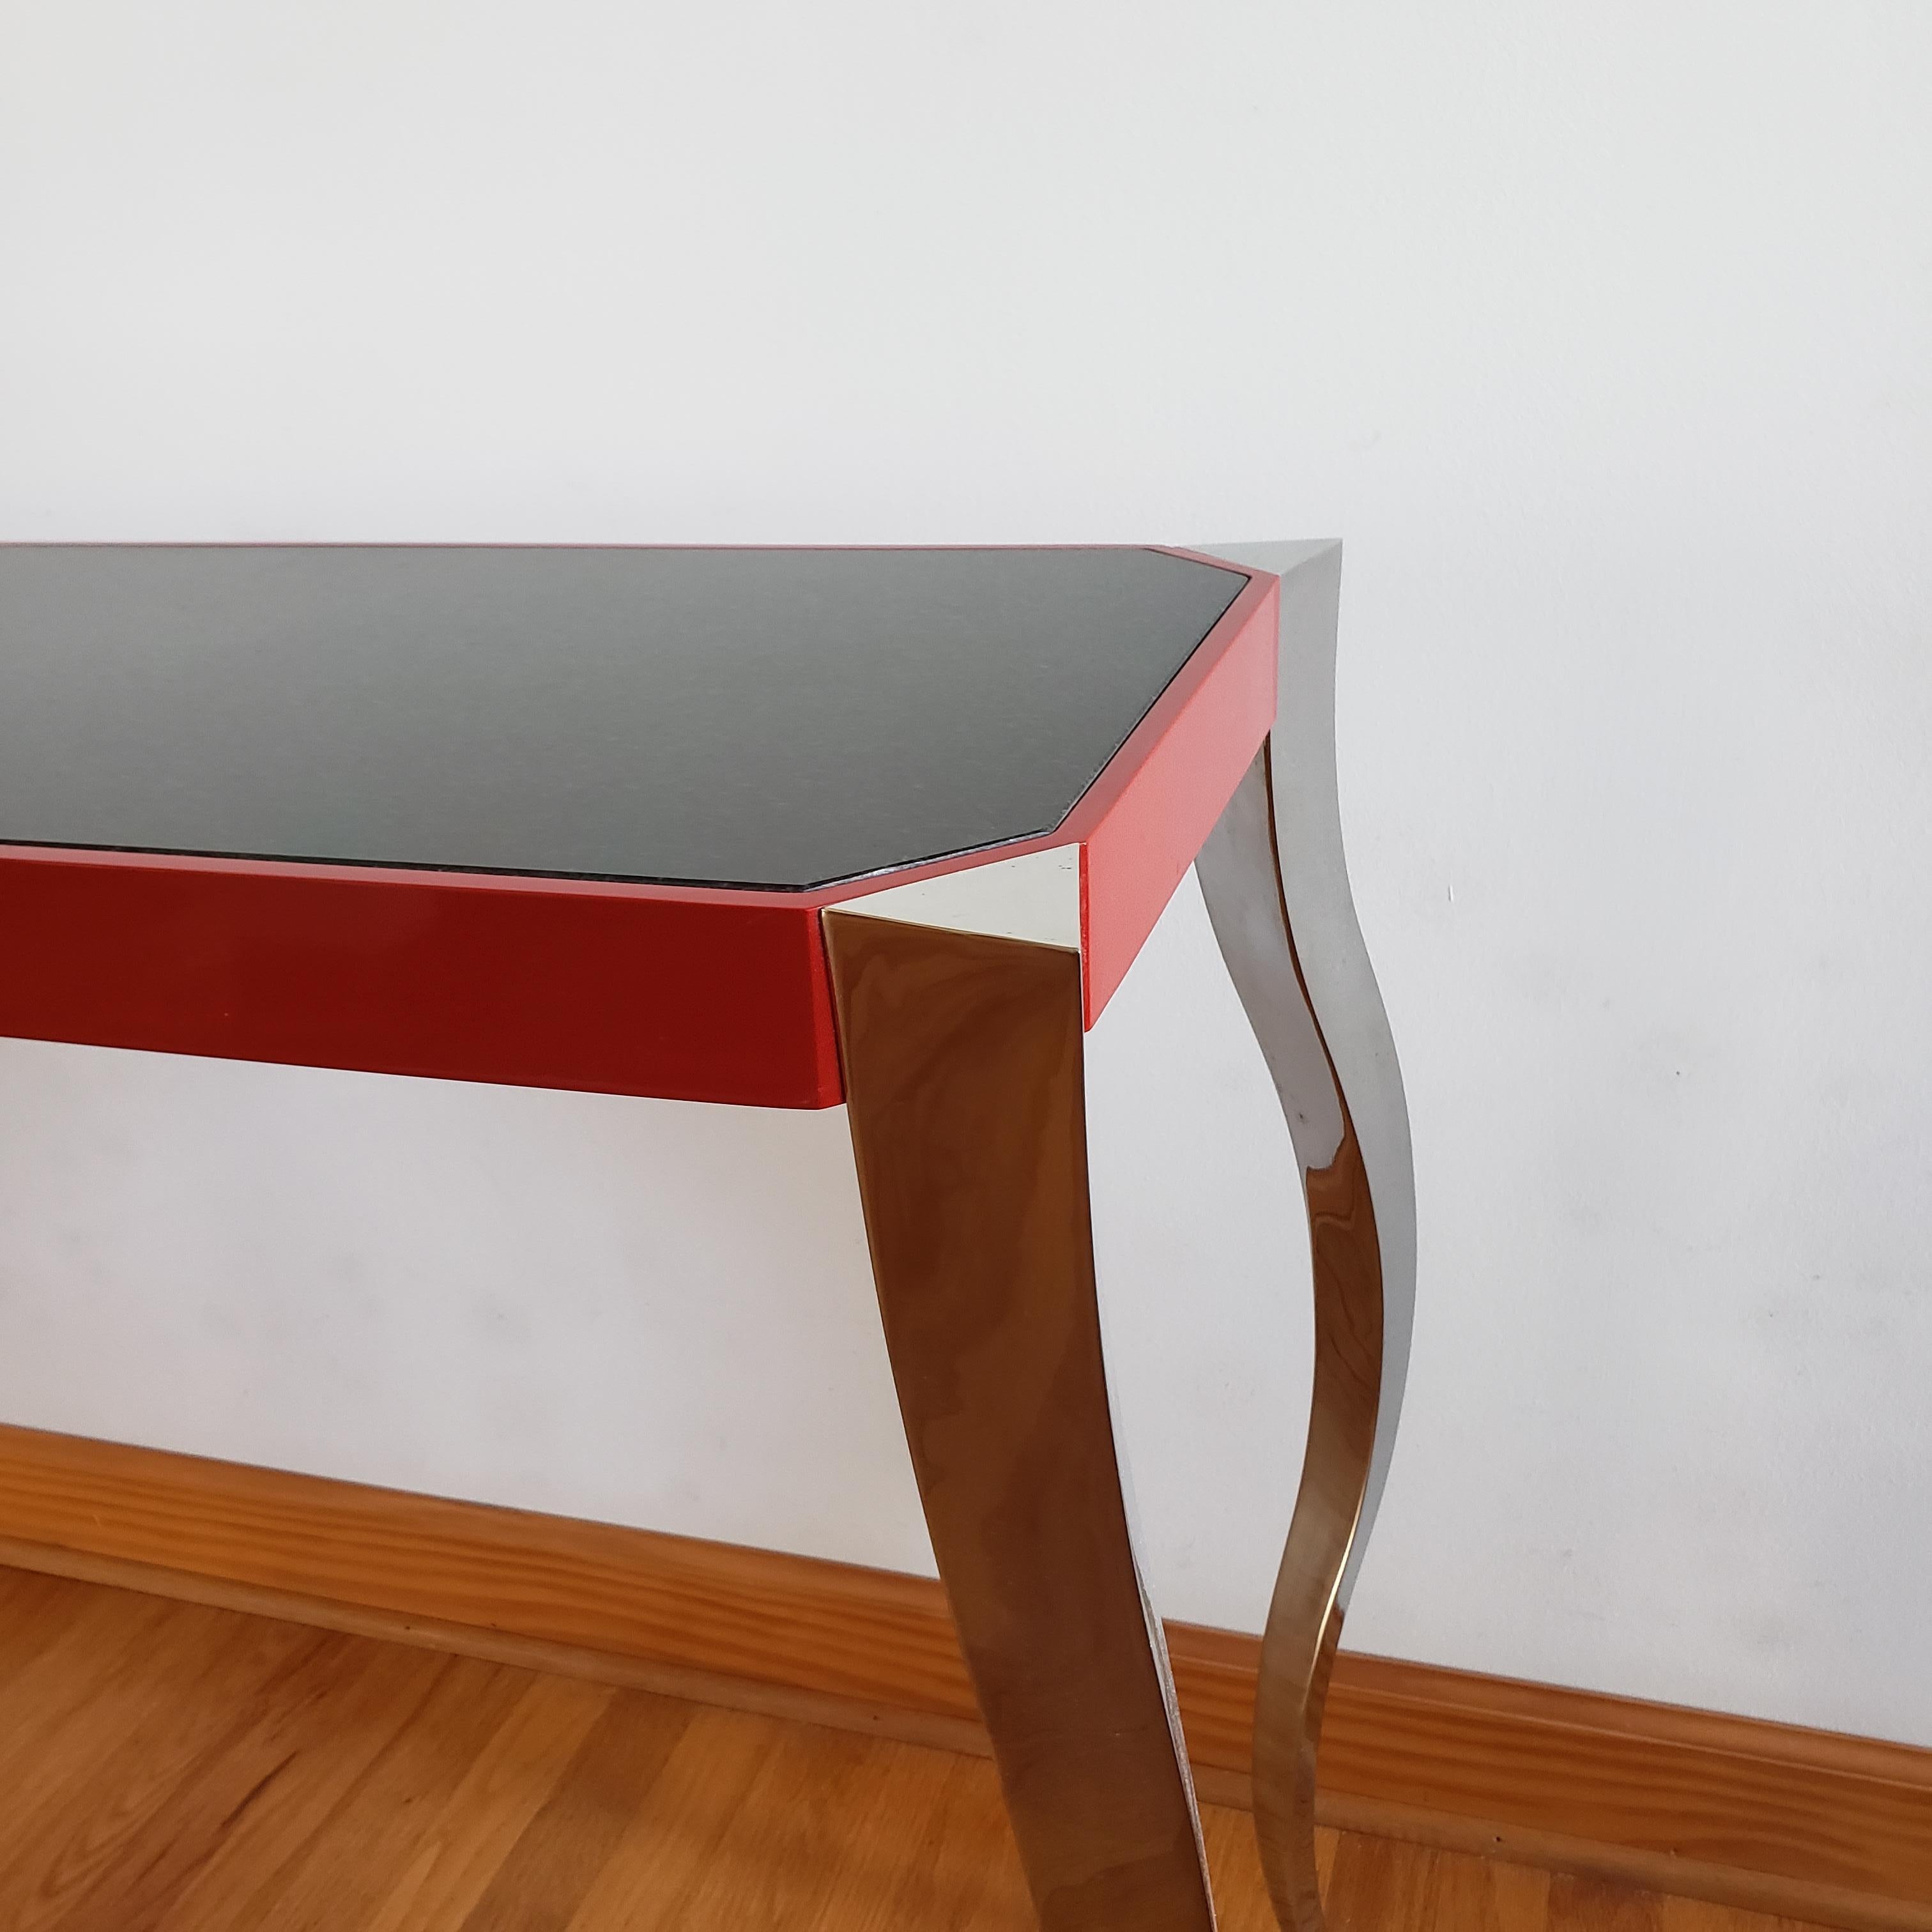 Forged Stainless and Painted Steel Console by Curtis Norton In Excellent Condition For Sale In Kilmarnock, VA